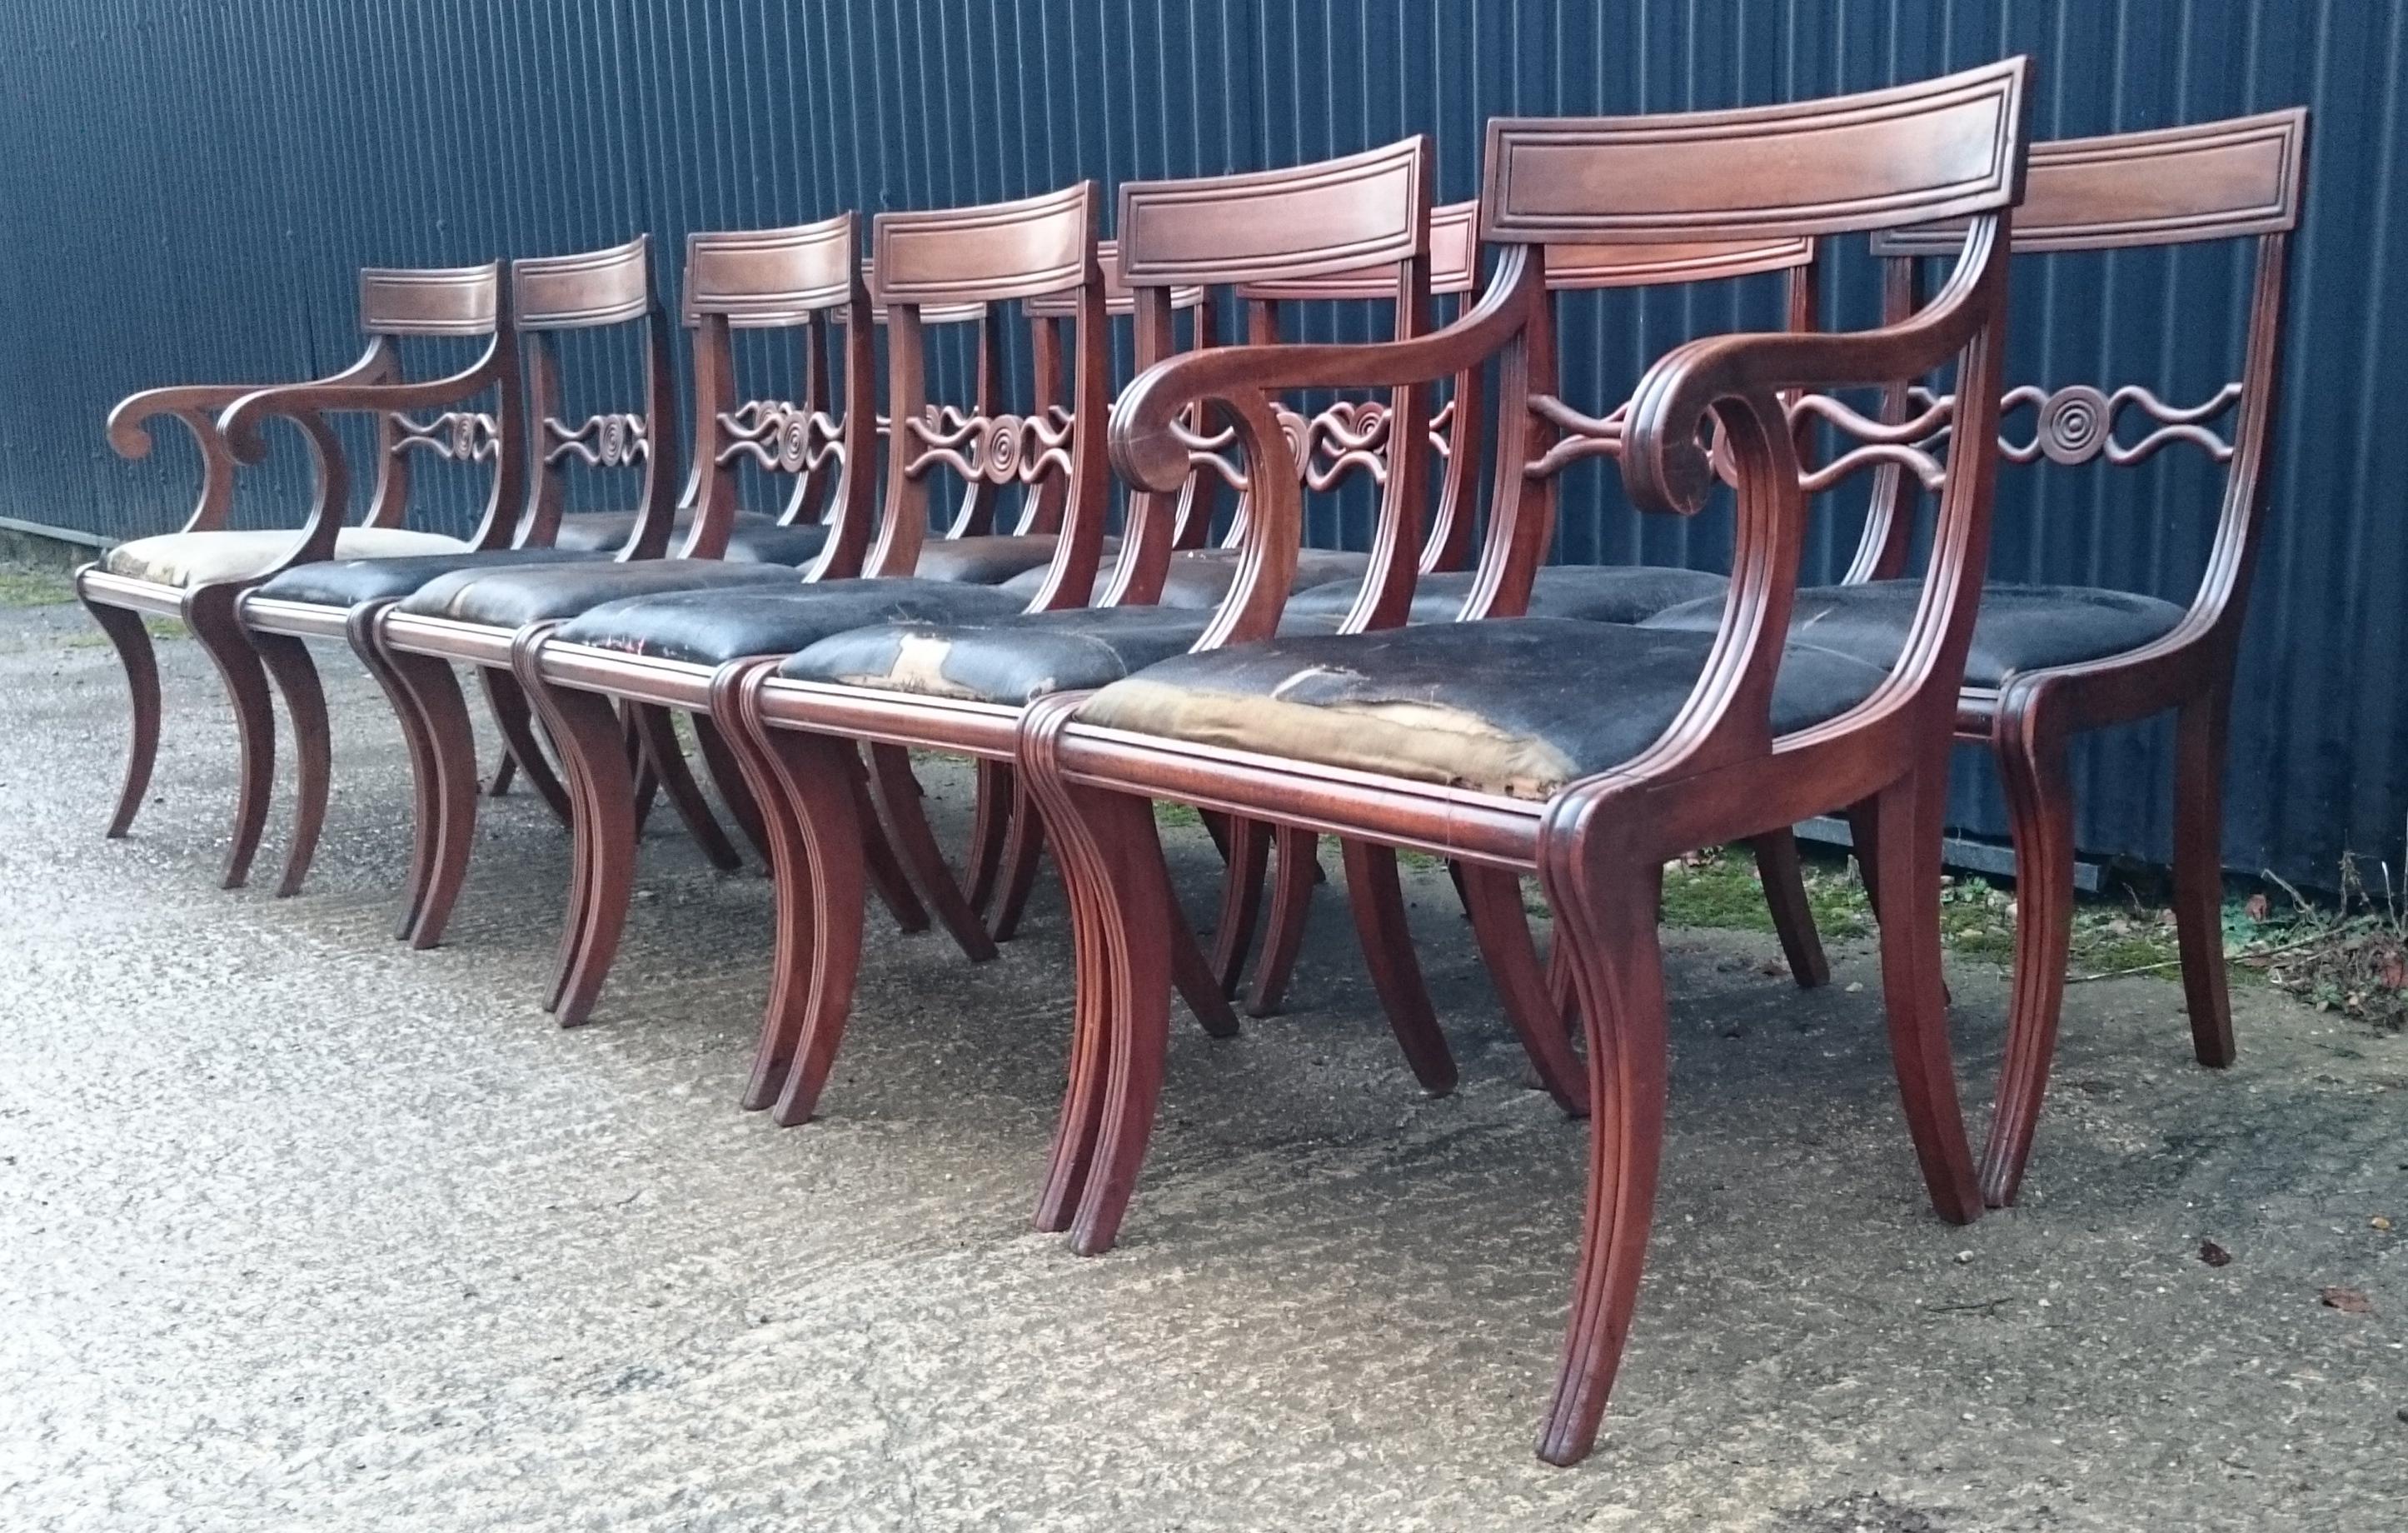 Set of Twelve Early 19th Century Regency Mahogany Antique Dining Chairs In Good Condition For Sale In Gloucestershire, GB